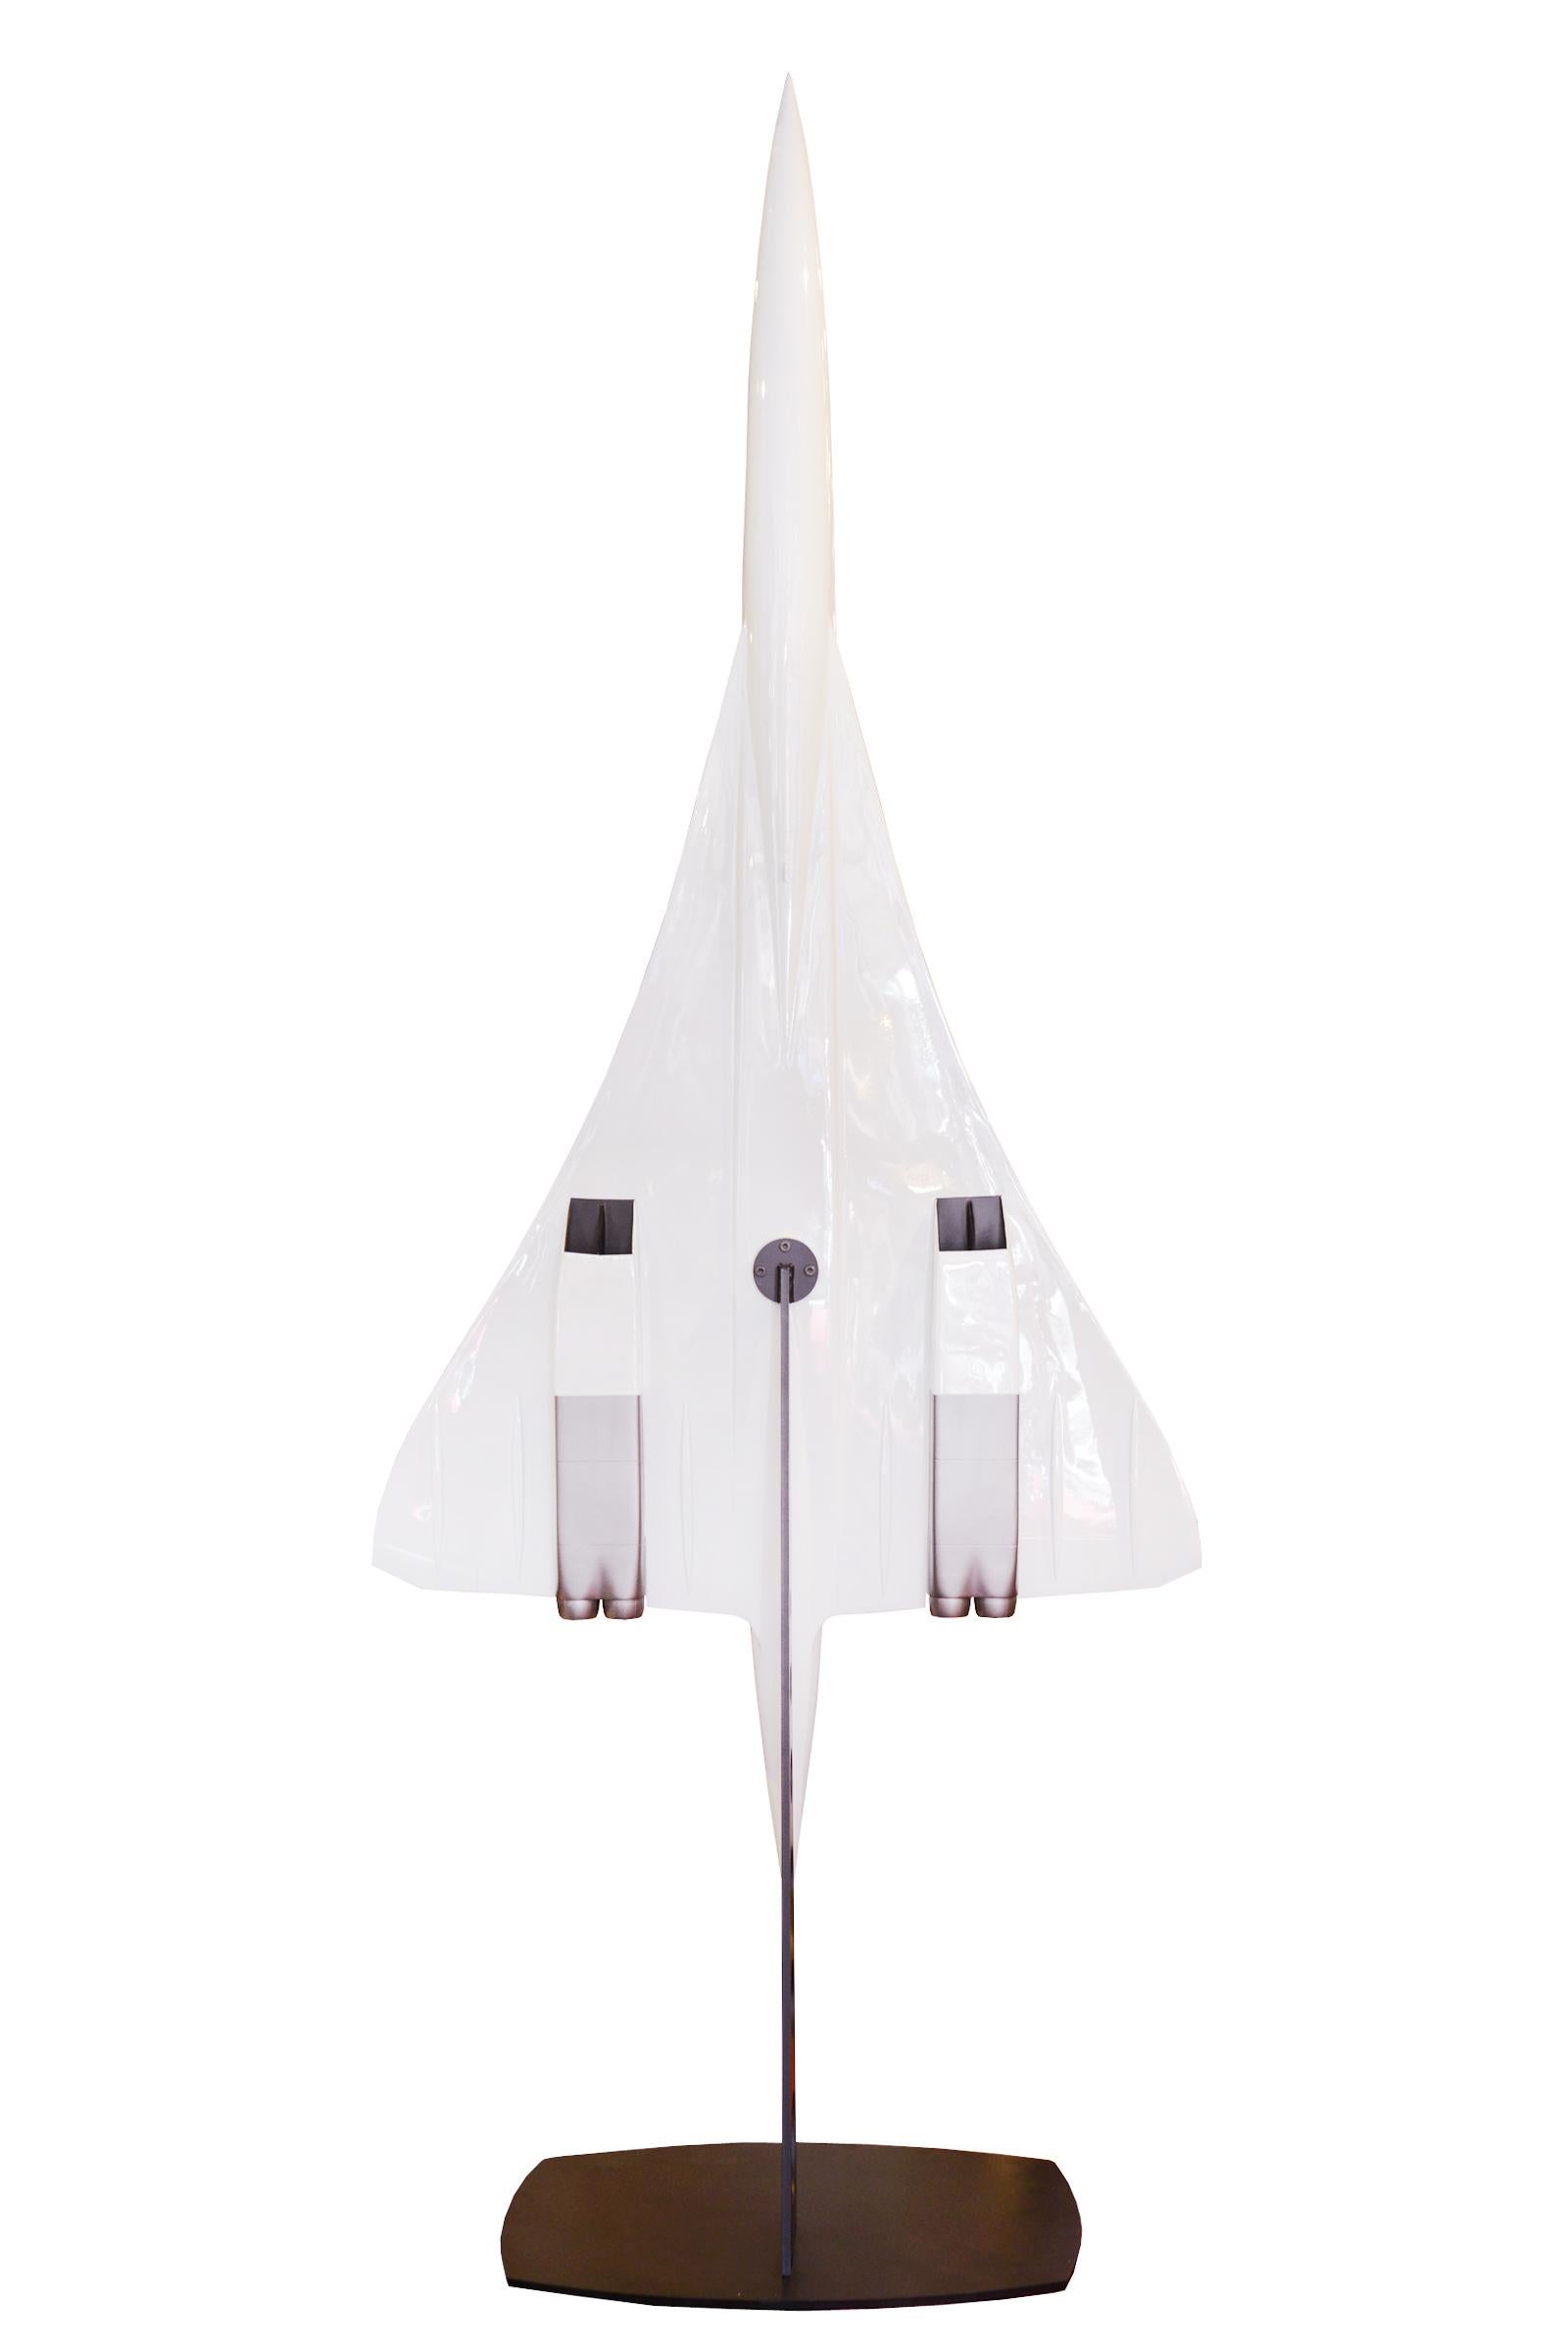 French Concorde Model Sculpture in Resin Scale 1/25 For Sale